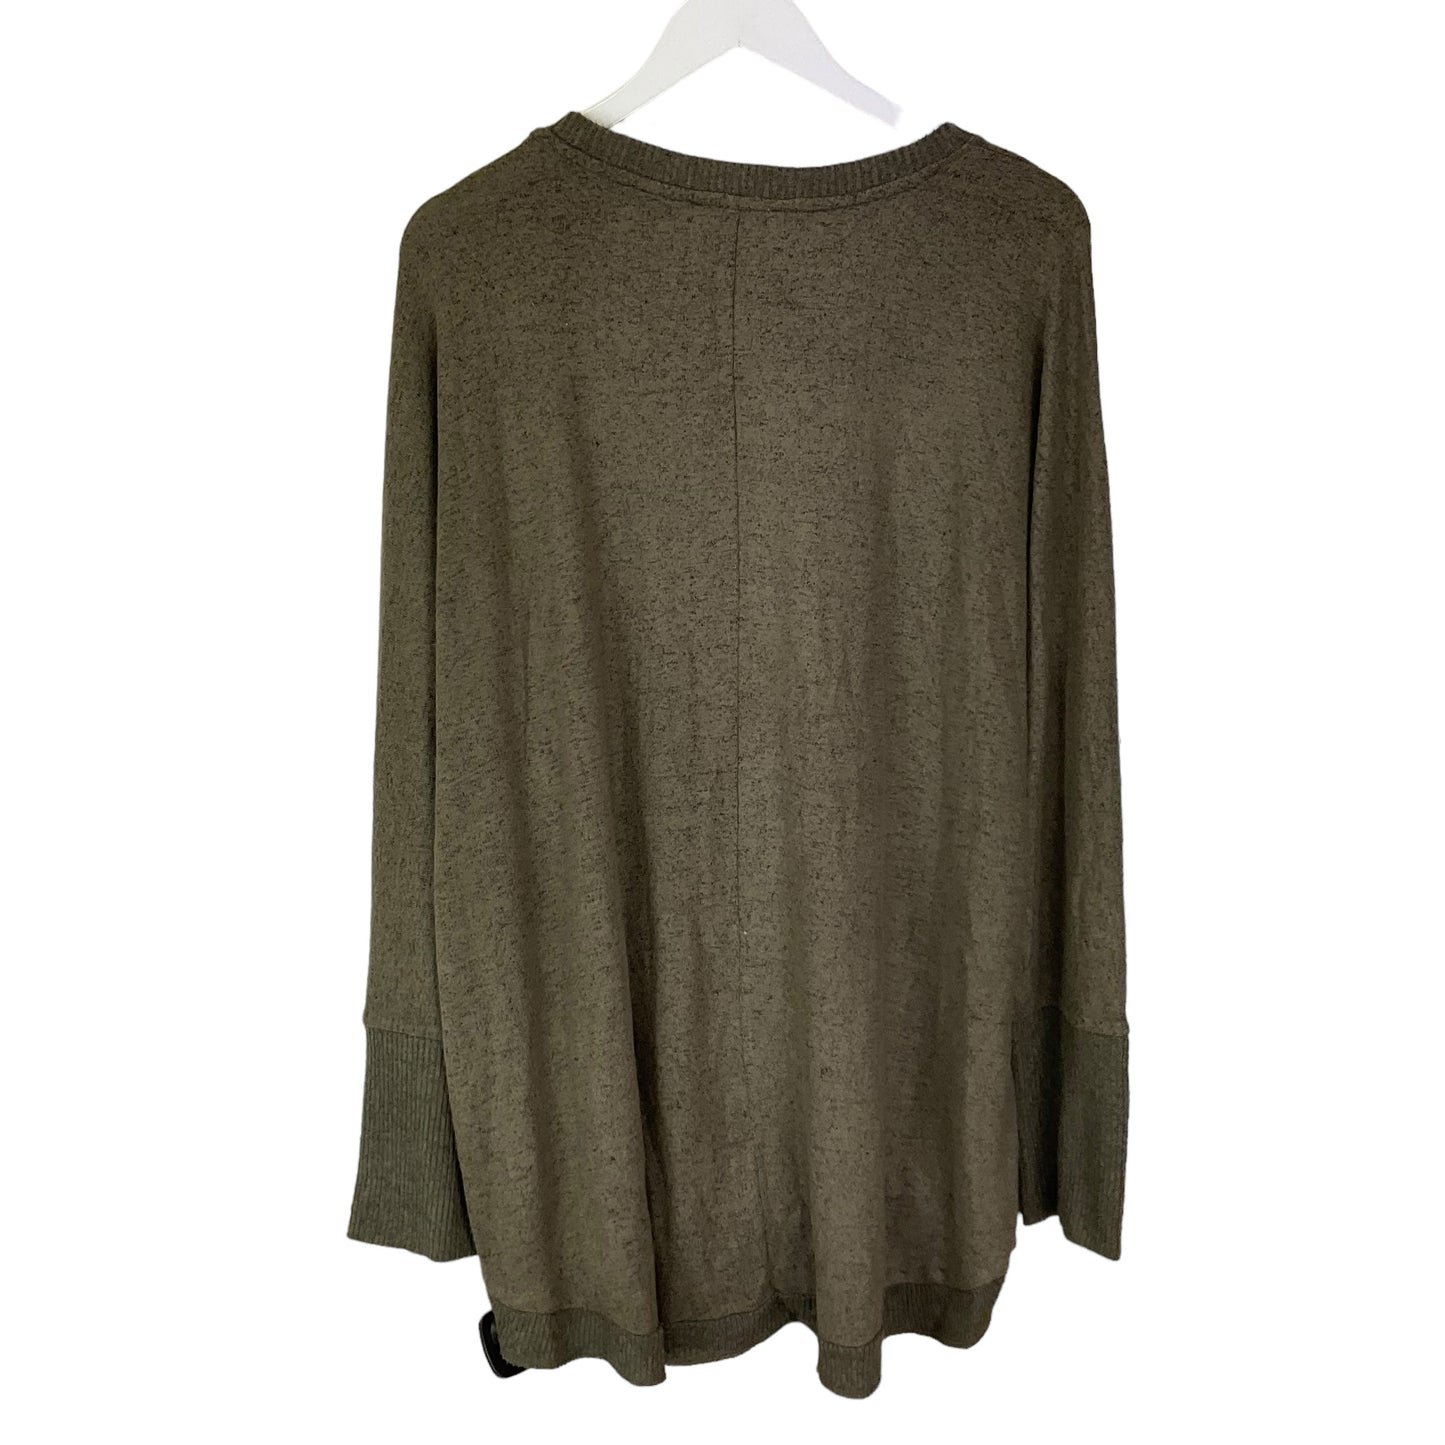 Grey Top Long Sleeve West Bound, Size 1x